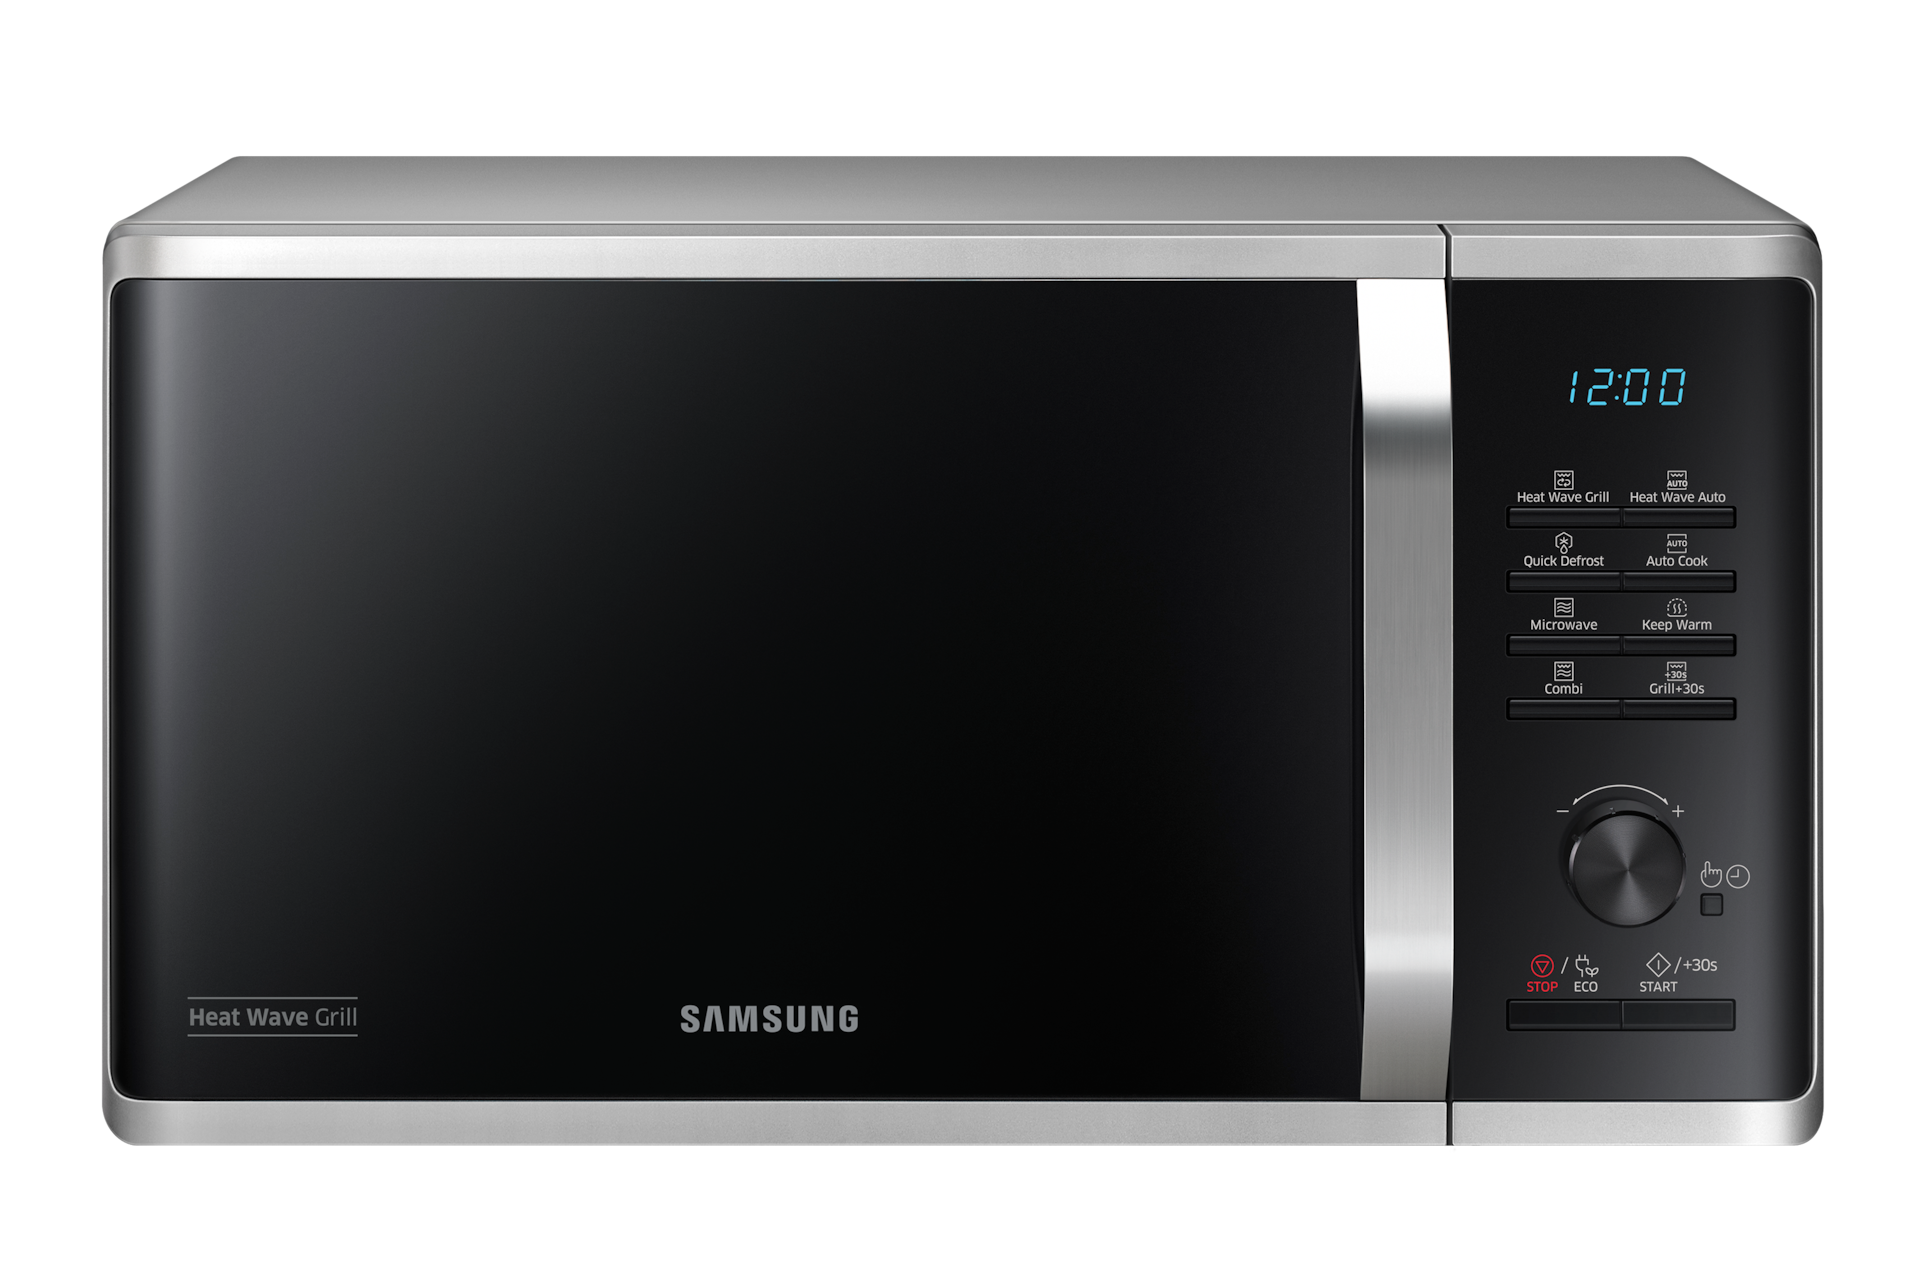 https://images.samsung.com/is/image/samsung/it-microwave-oven-grill-mg23k3575cs-mg23k3575cs-et-001-front-silver?$650_519_PNG$